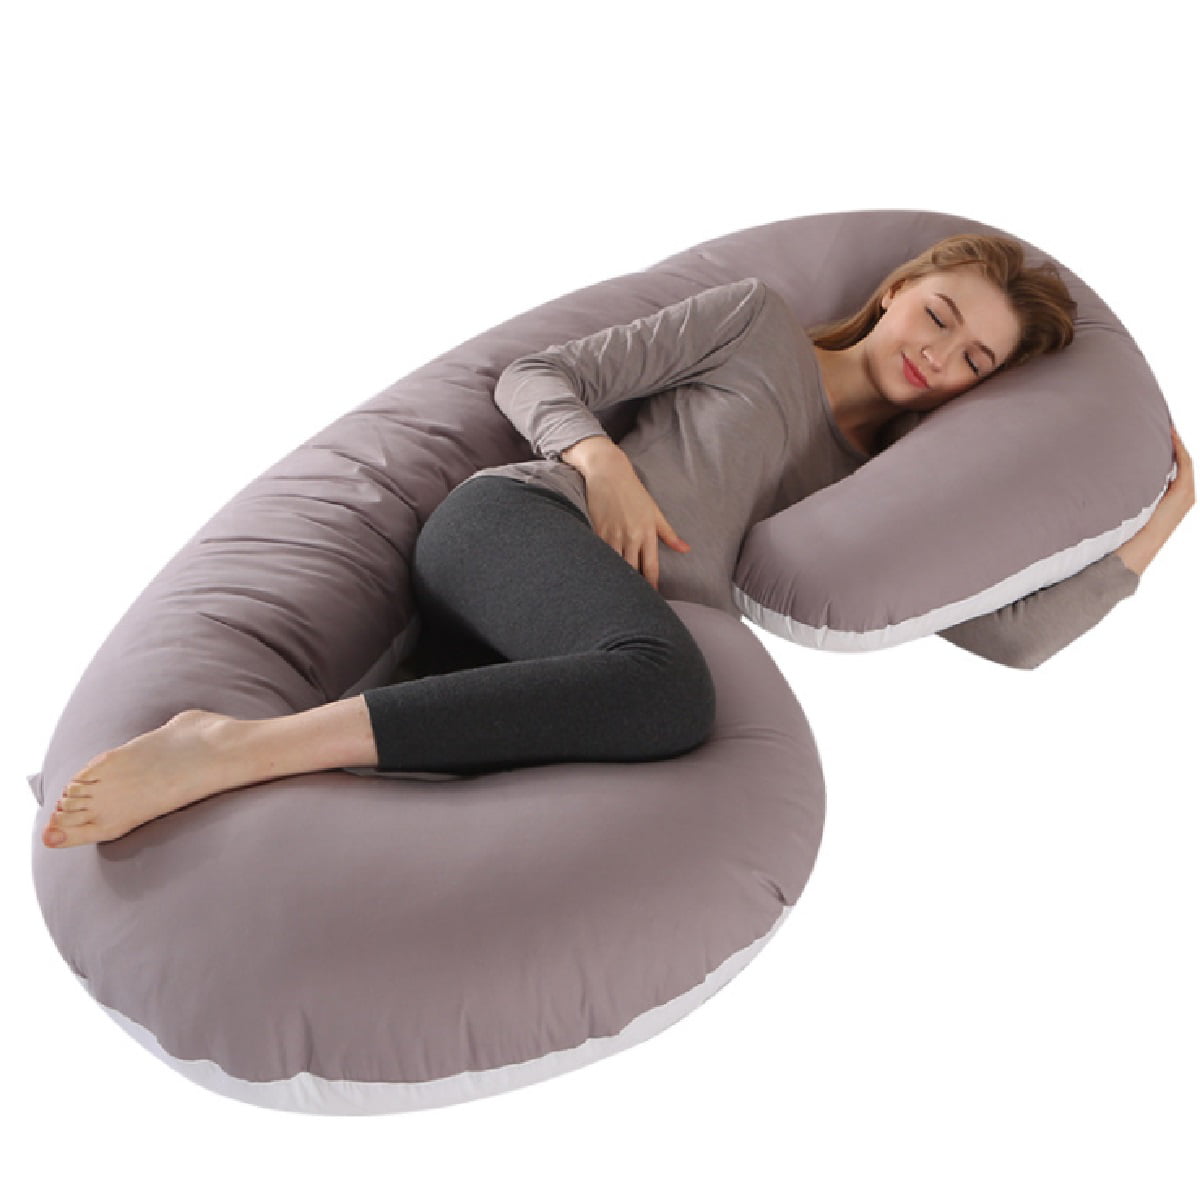 C/U/J Shaped Full Body Pregnancy Pillow, Maternity Body Pillow for Pregnant  Women, soft and practical back cushion,for pregnant women, the mother and  side sleeper - Walmart.com